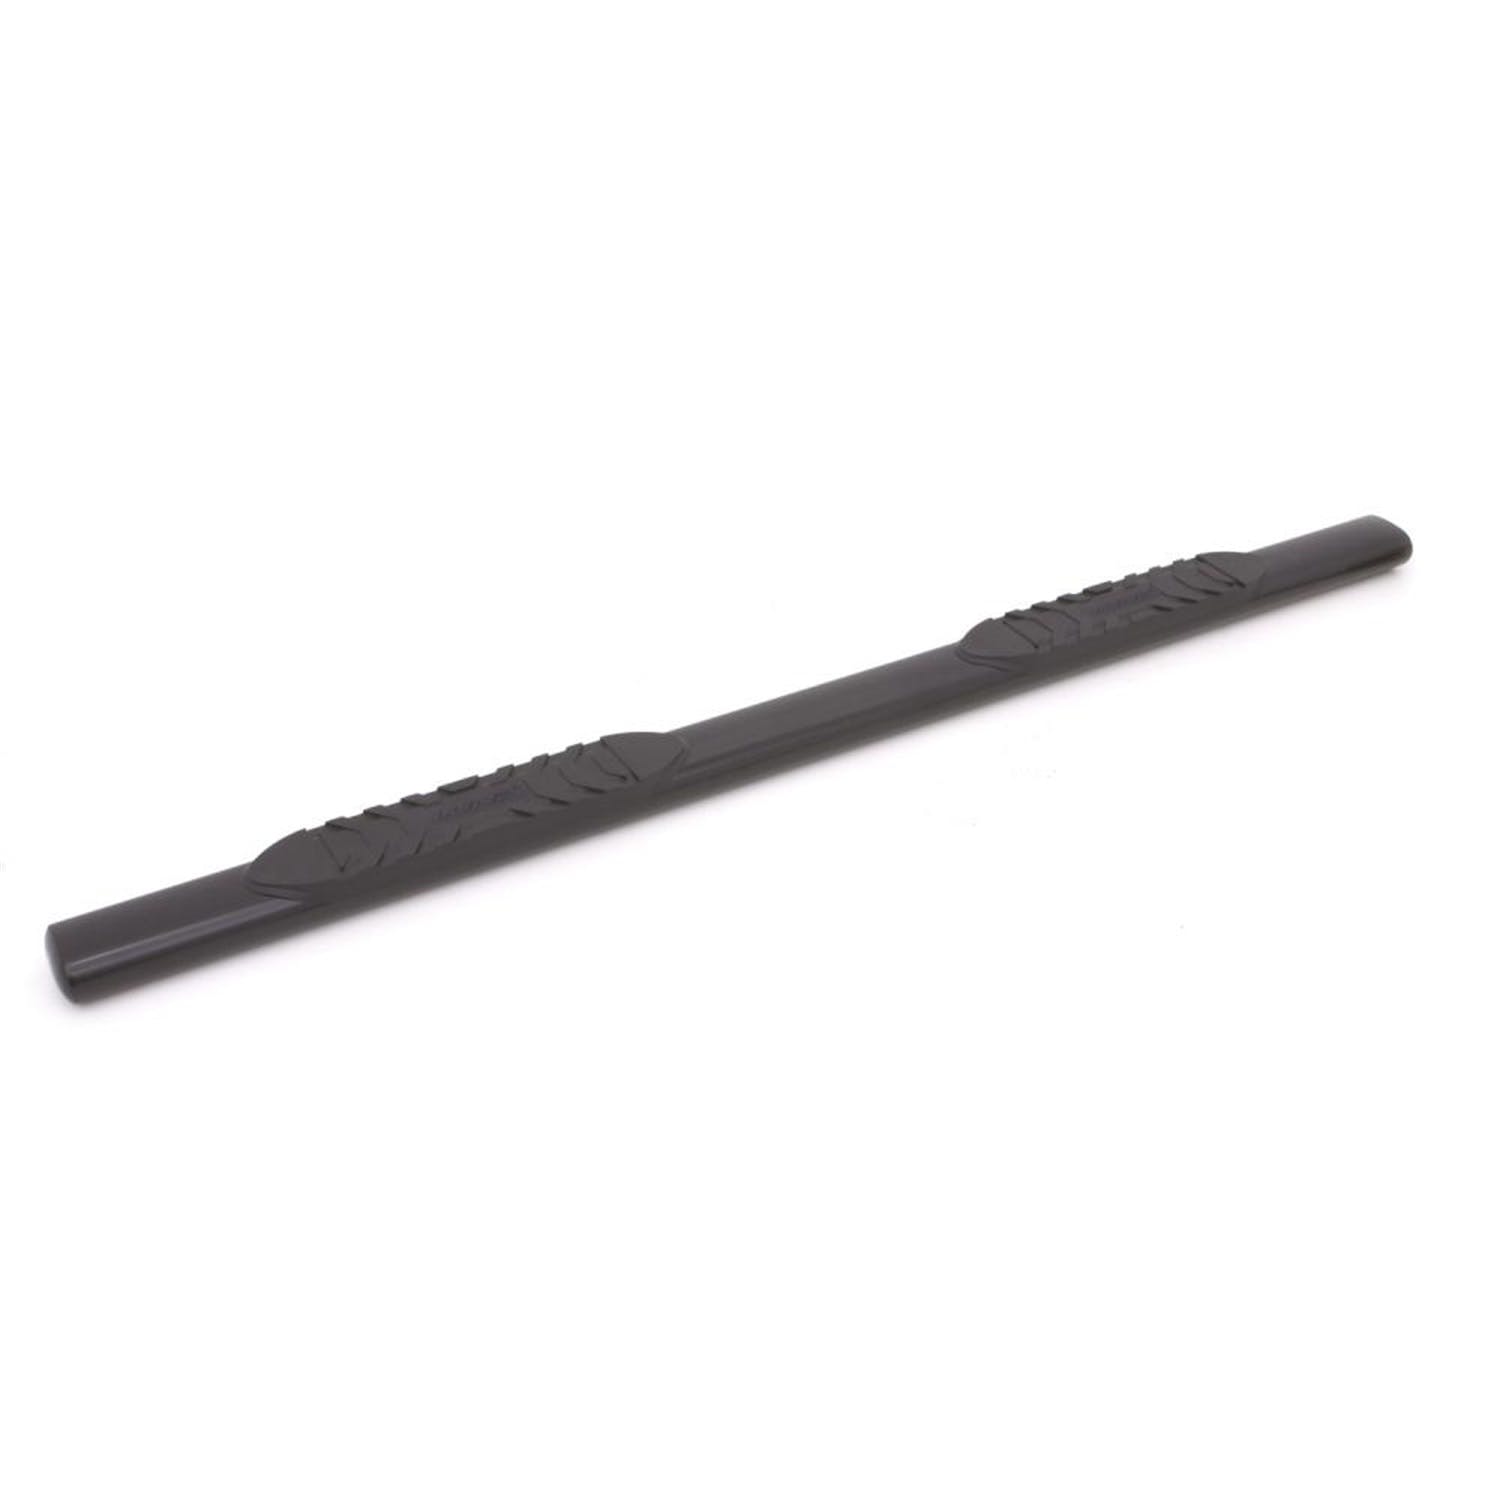 LUND 24010561 5 Inch Oval Straight Nerf Bar - Black 5 In OVAL STRAIGHT STEEL